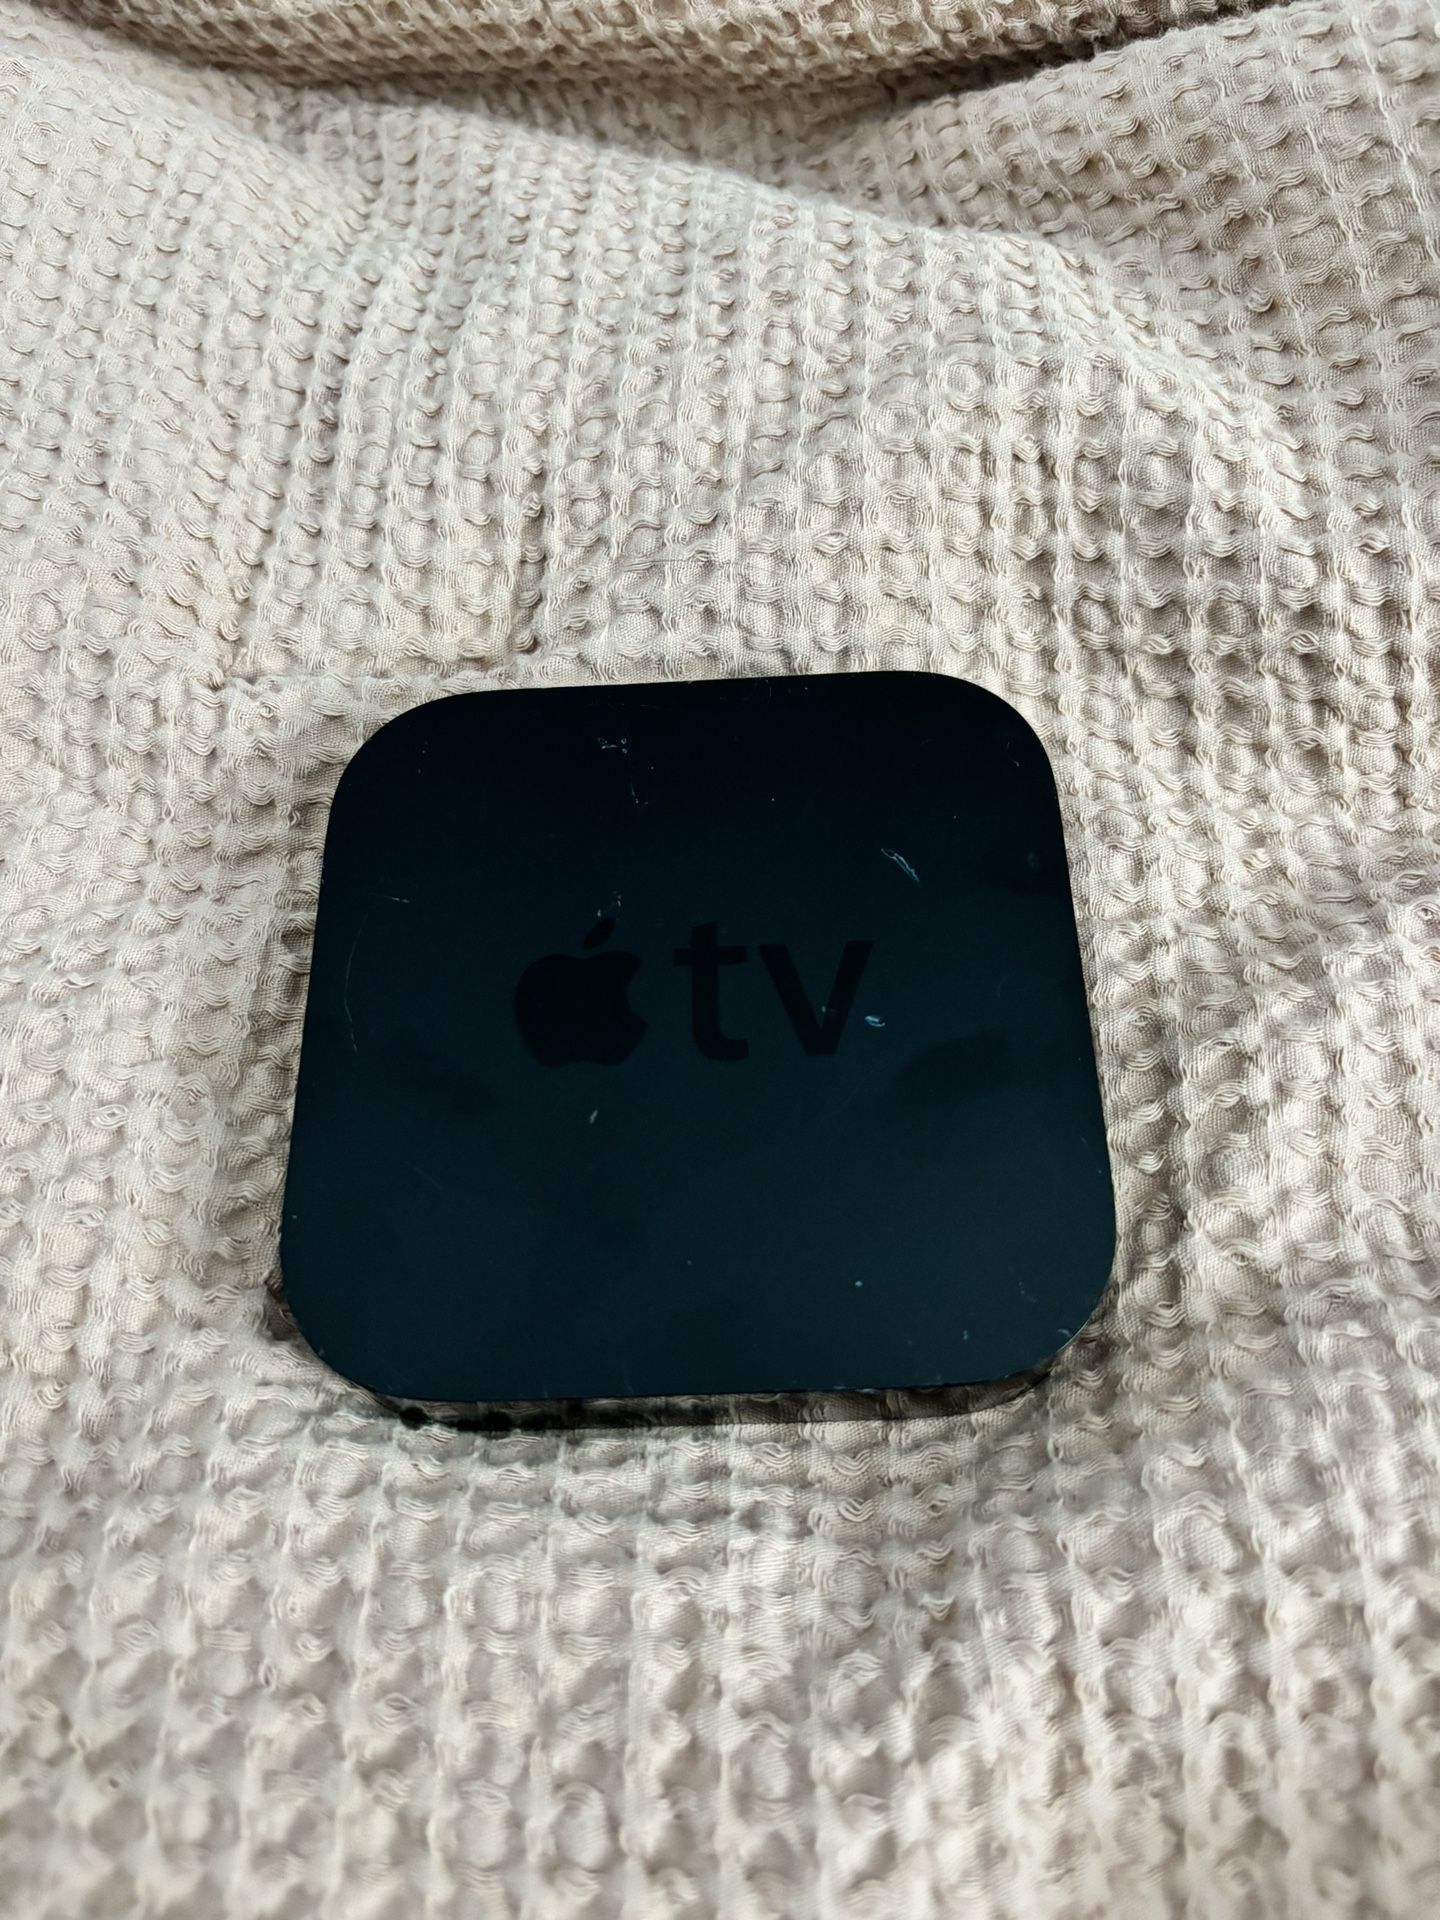 Apple TV 3rd Generation (with Remote)